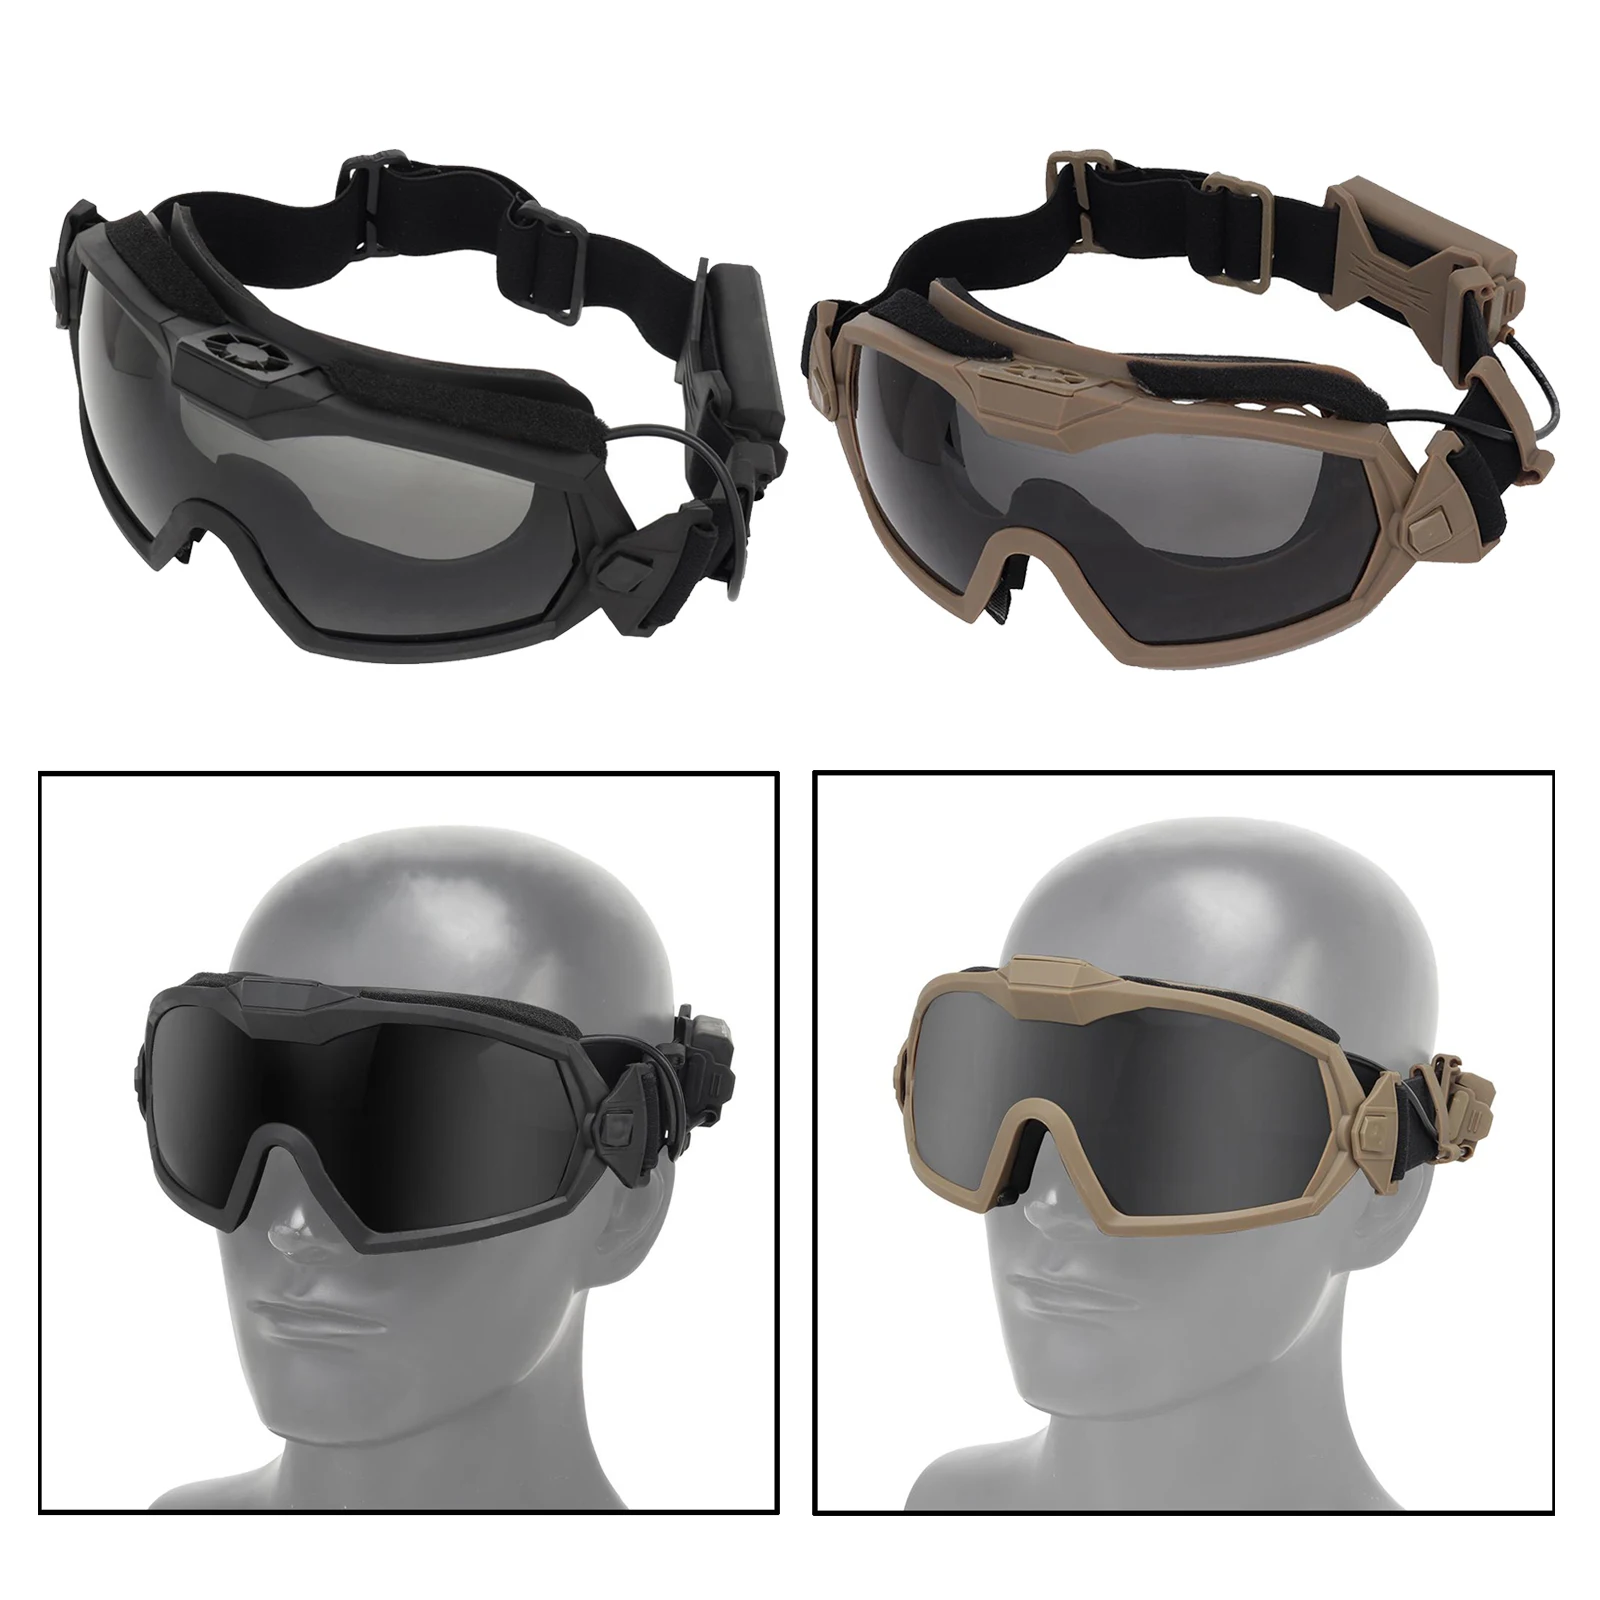 Anti-Impact Goggles with Fan, Tactical Safety Goggles Anti-Fog UV400 Glasses Eyewear with 2 Lens for Riding Shooting Hunting